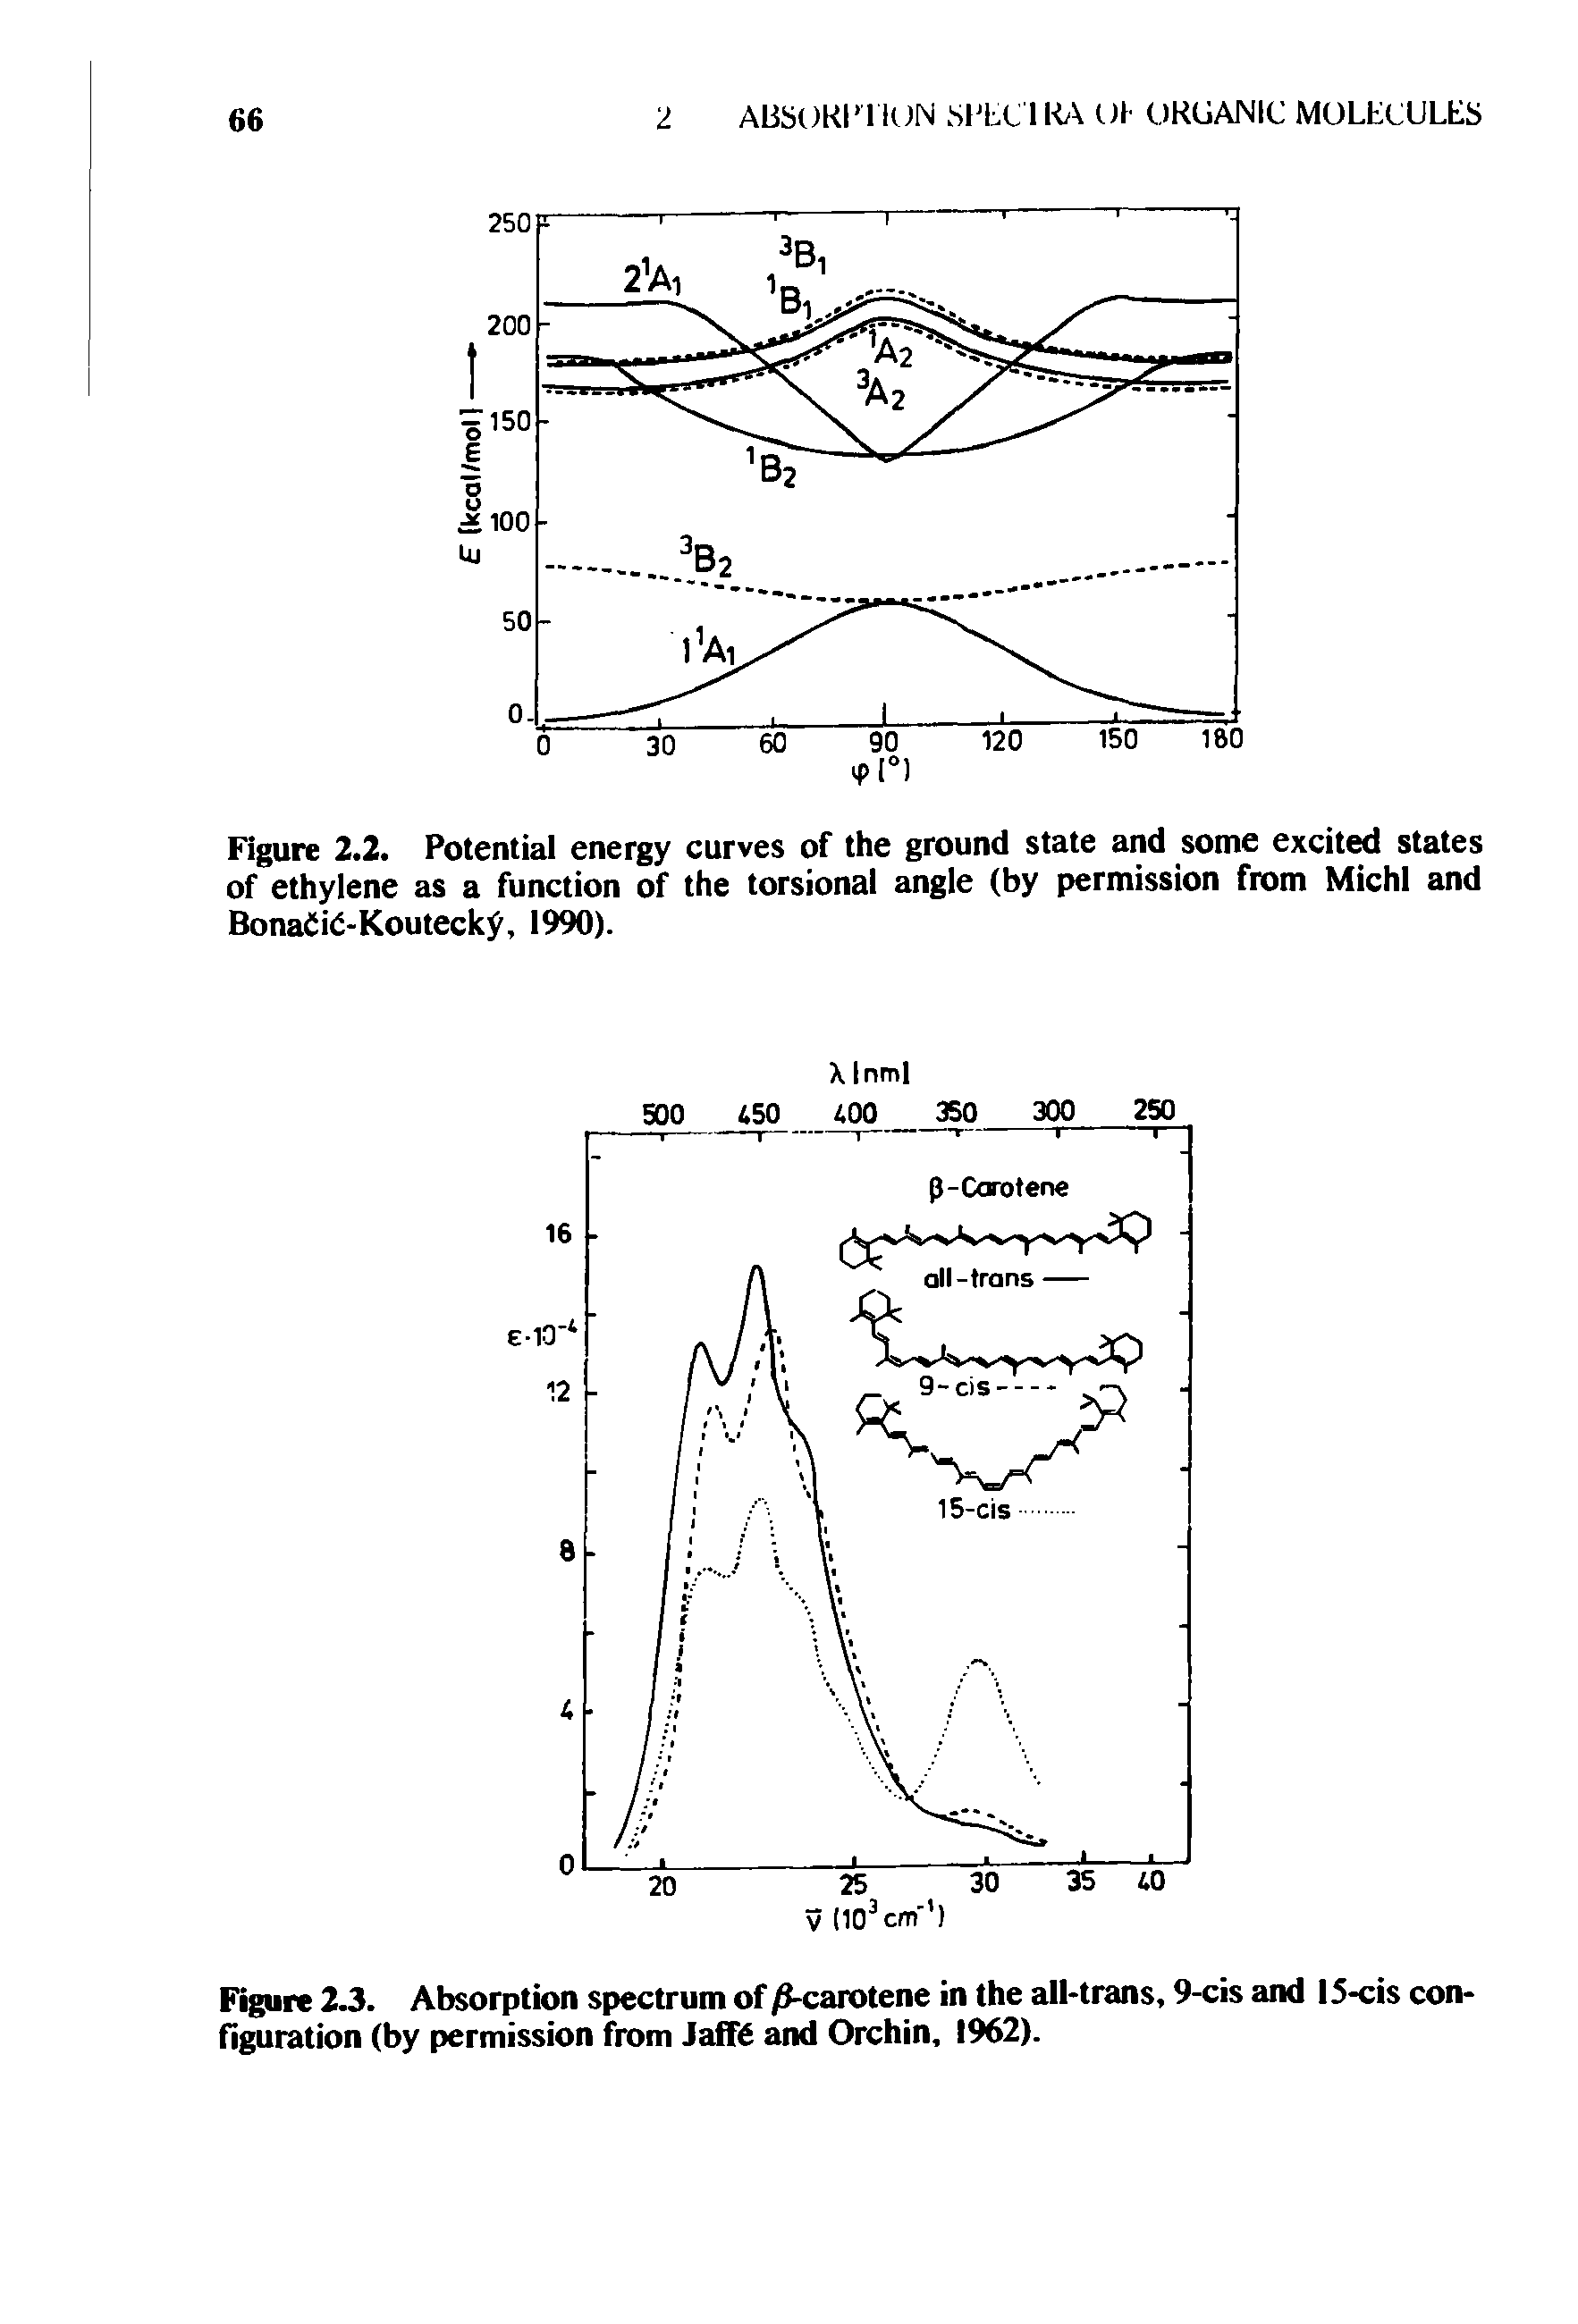 Figure 2.2. Potential energy curves of the ground state and some excited states of ethylene as a function of the torsional angle (by permission from Michl and Bona(ii( -Kouteck, 1990).